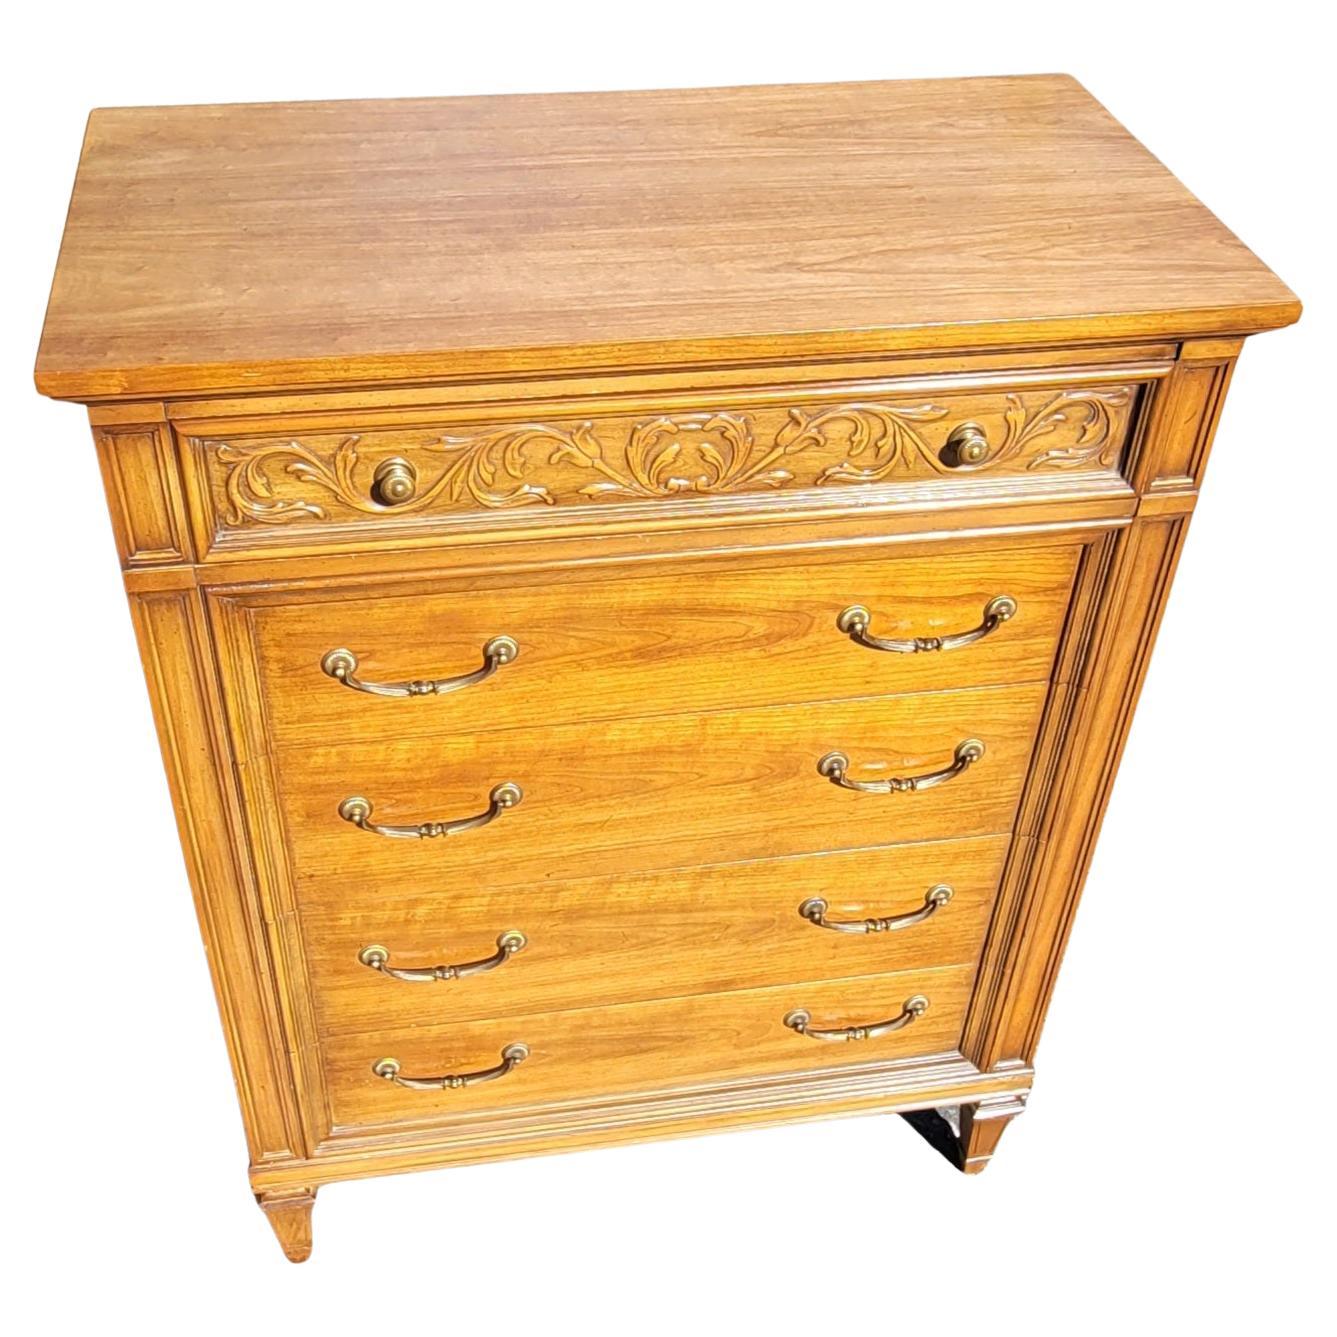 A beautiful pair of Thomasville Neoclassical Style Fruitwood chest of drawers in good vintage condition. Features 5  dovetailed drawers with original heavy duty drawer pulls and knobs, top drawer flanked with skillfully carved flowers throughout..